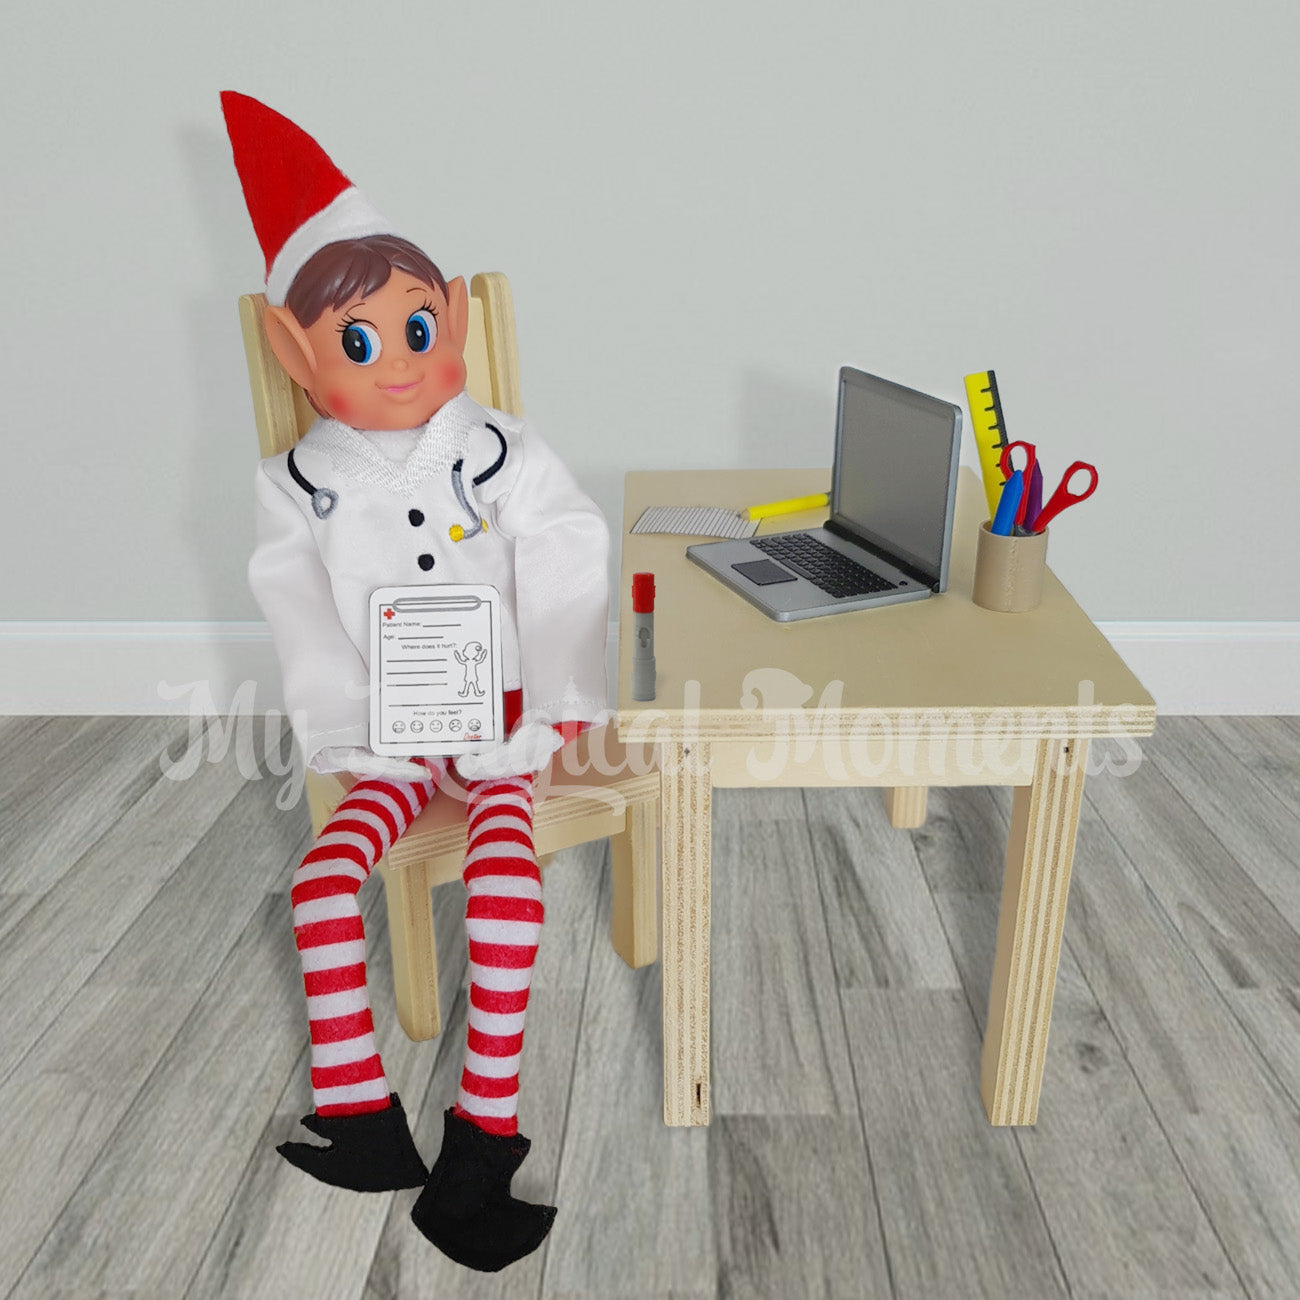 Elves behavin badly dressed as a doctor at a wooden table and using his little laptop and Humira pen